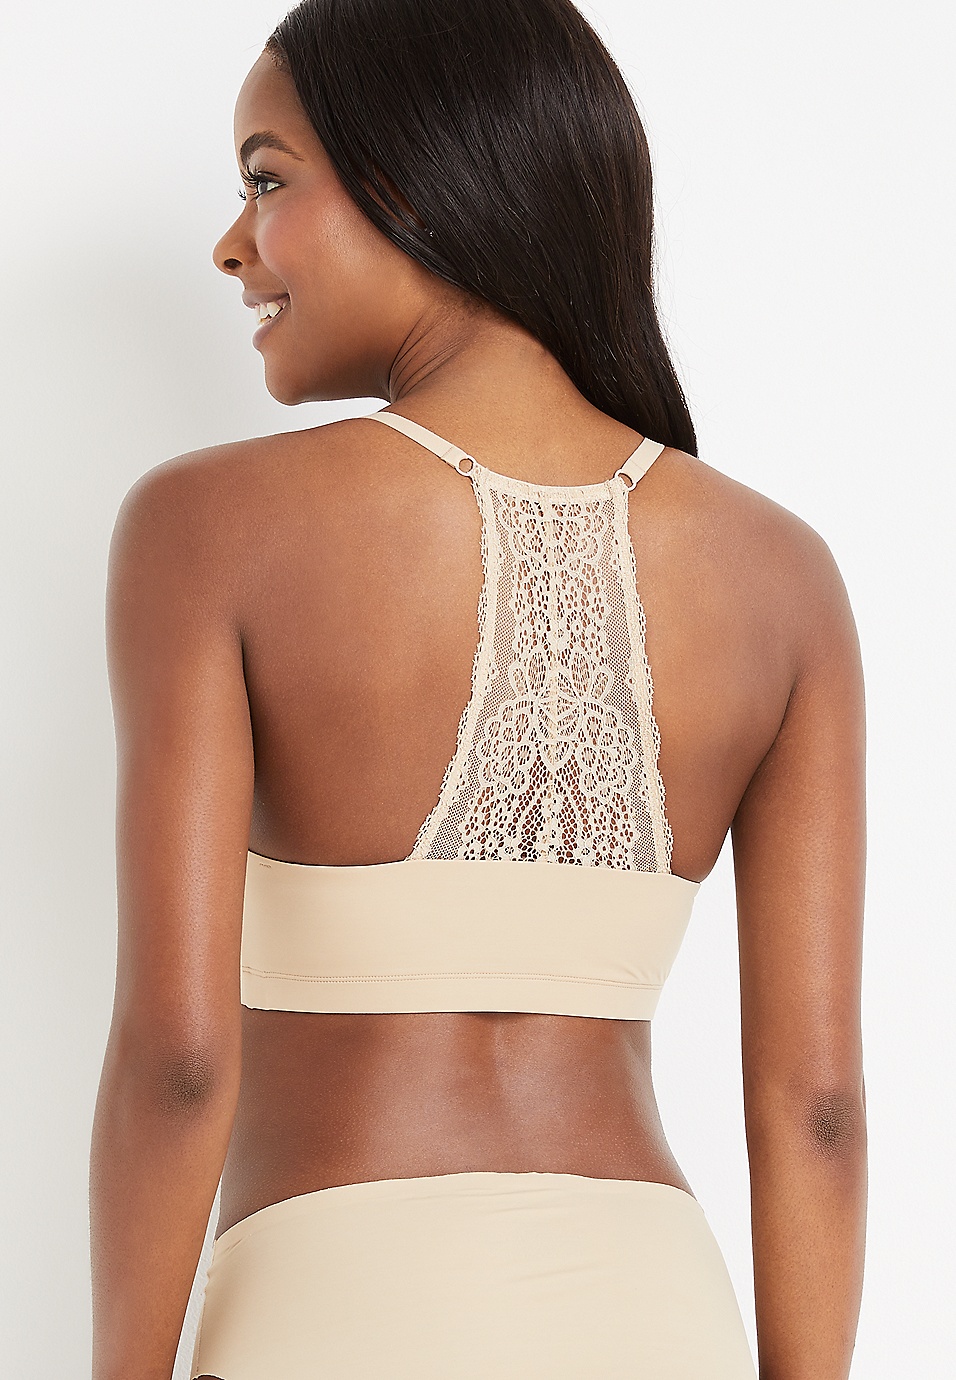 Maurices Ivory Lace Bralette XL Racerback Padded Cream Stretch X